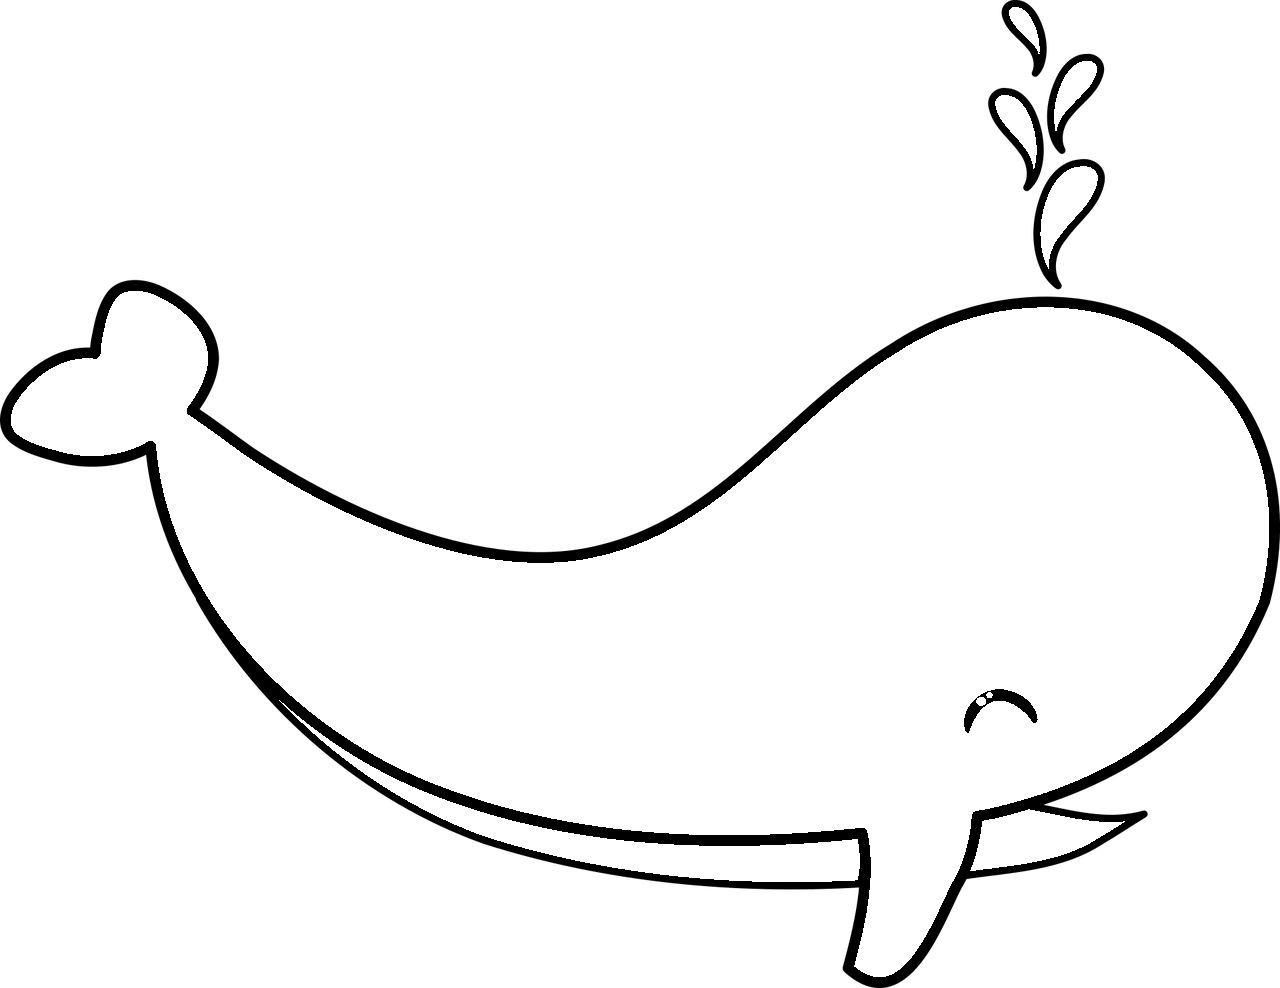 Coloring page of a whale